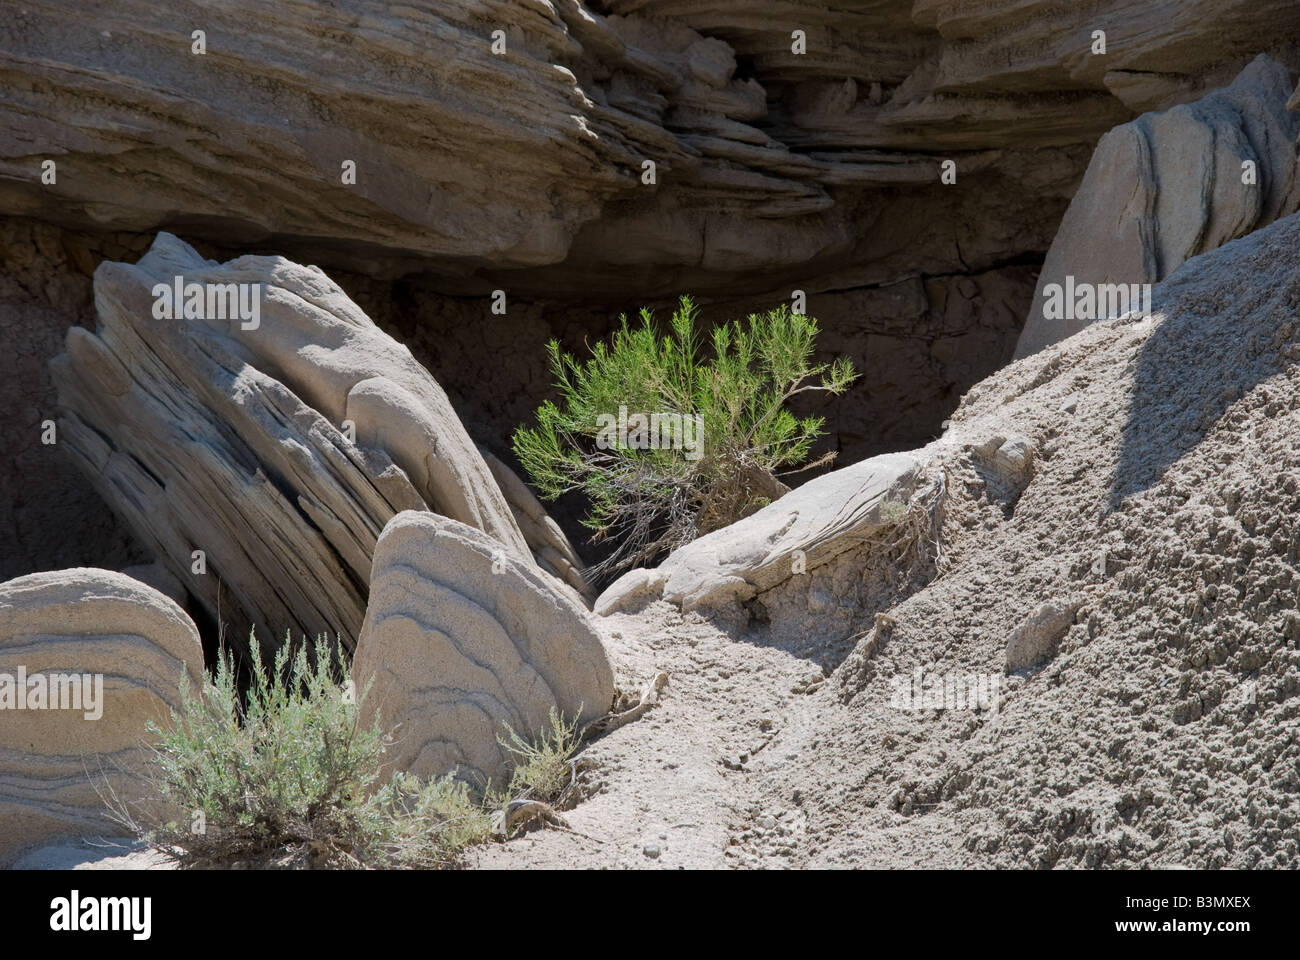 Rocks and highlighted bush at the Toadstool geologic state park in the badlands section of Nebraska Stock Photo